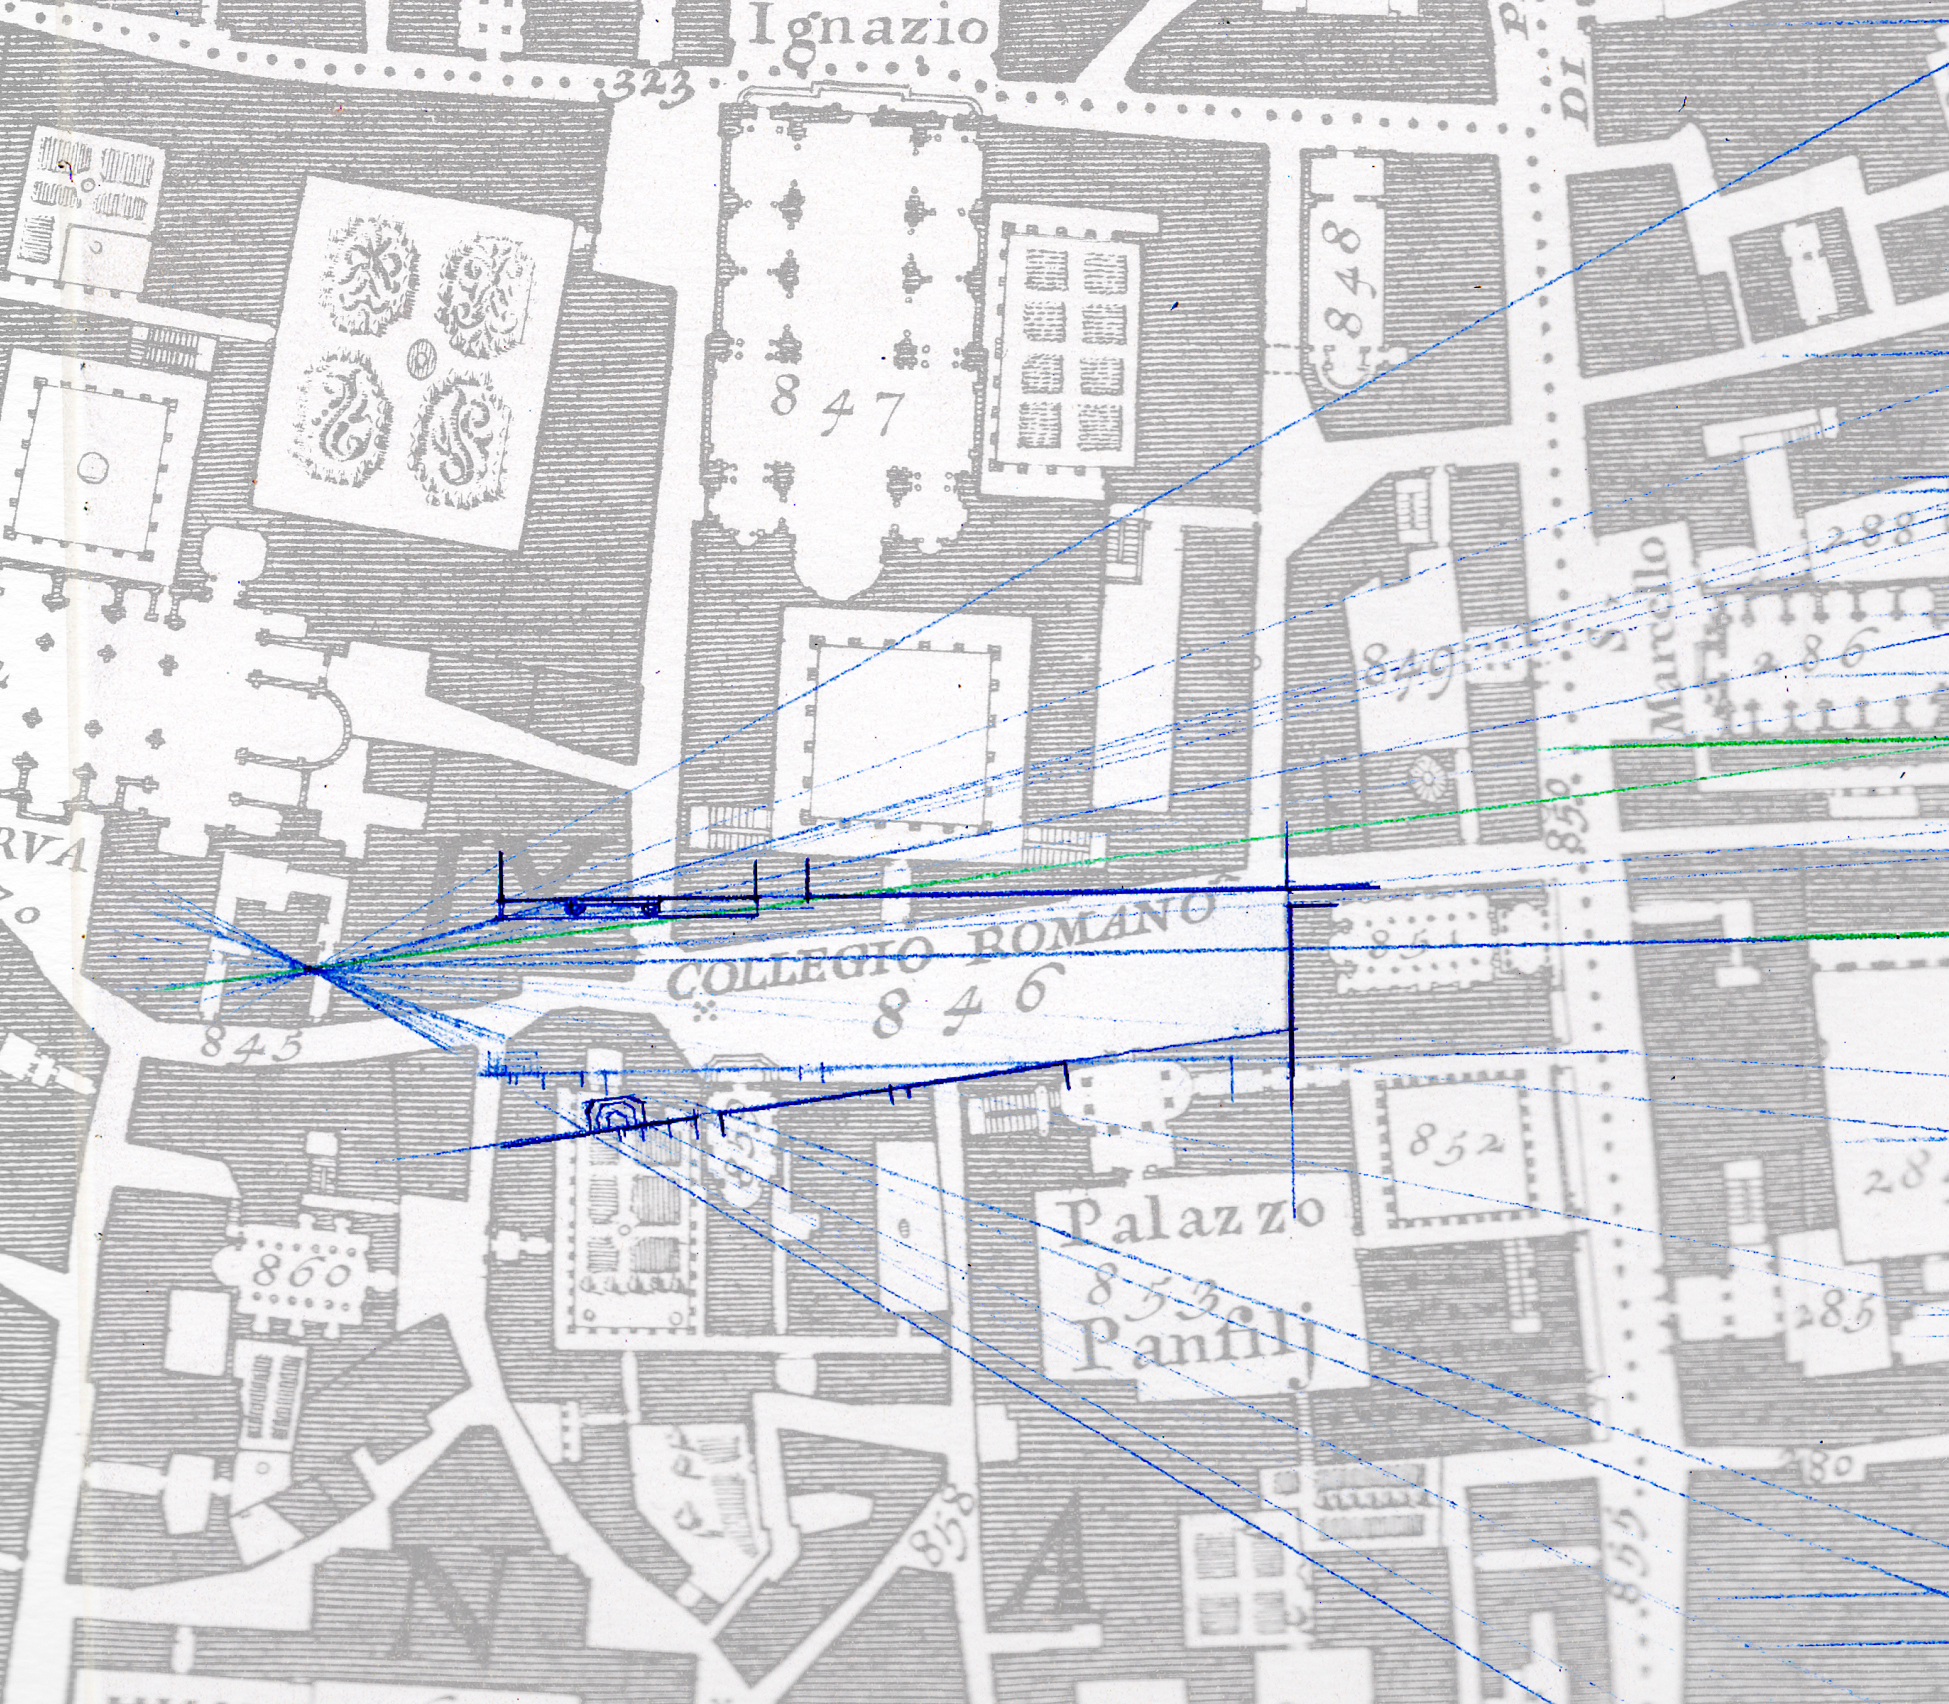 Real-ize the integrations of cities through drawing